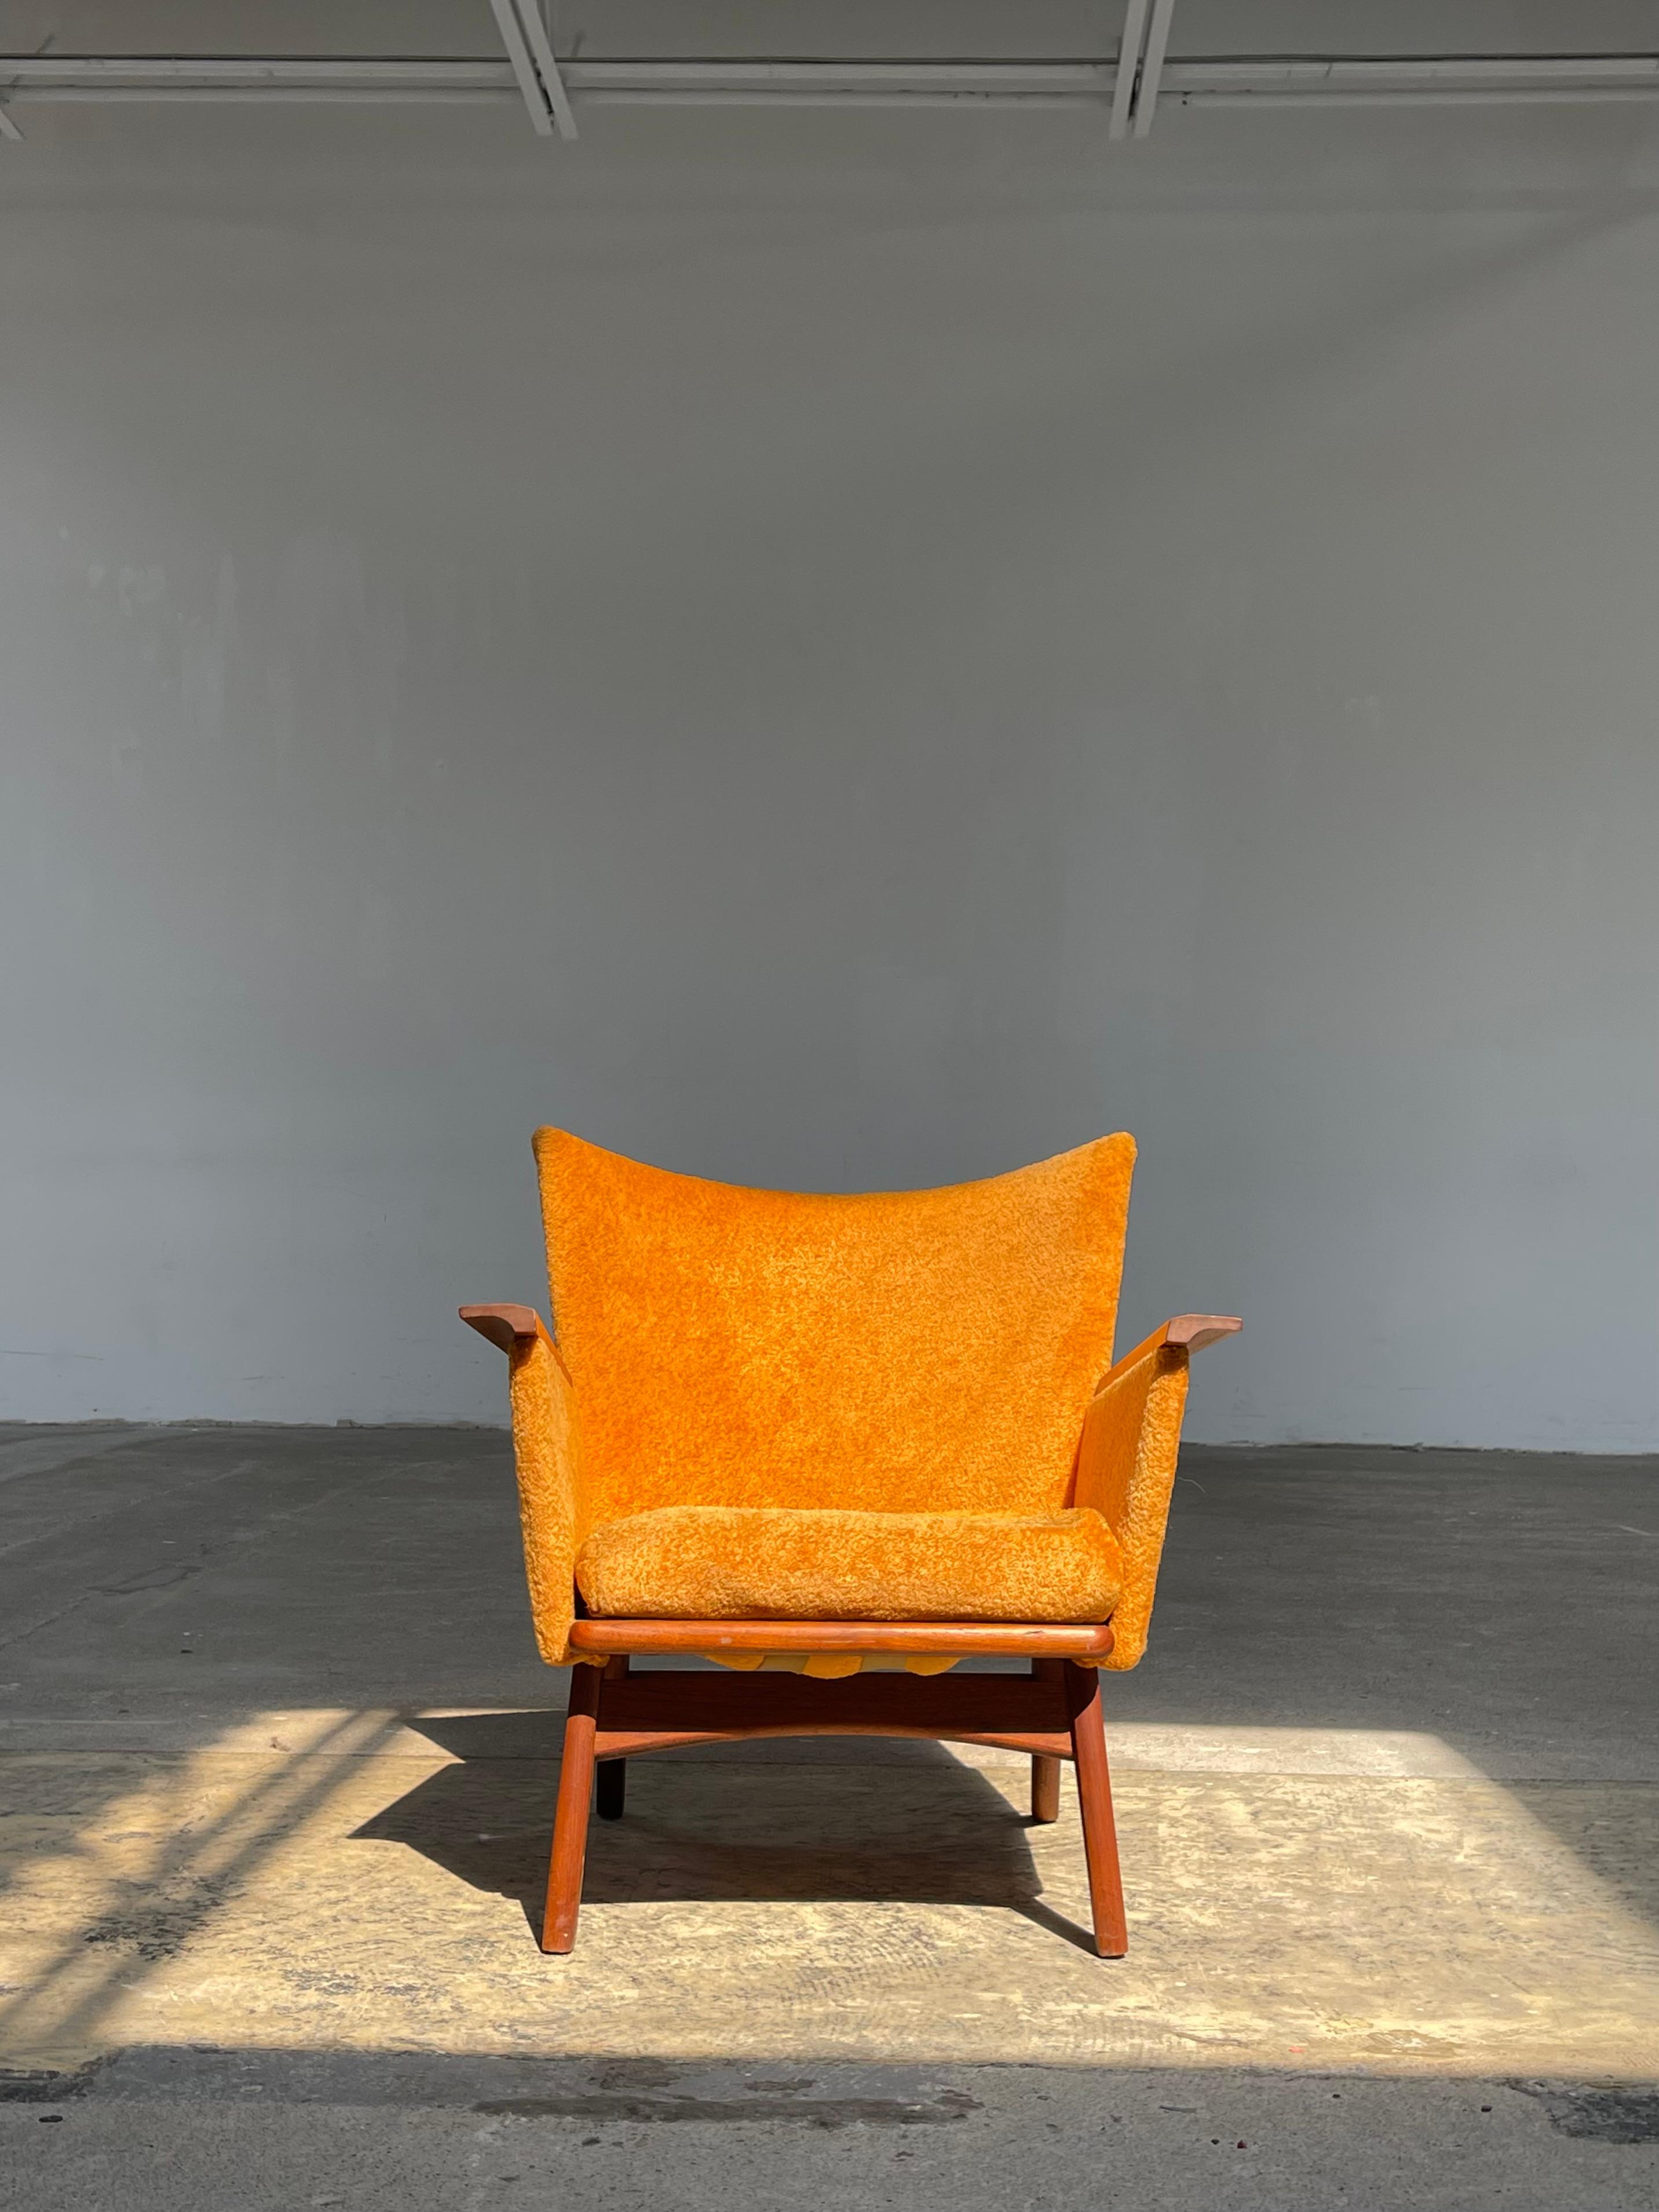 A bold example of mid-century modern design, this authentic, vintage Adrian Pearsall lounger is beautiful to behold. 

Beautiful solid walnut base & arm details. Sharp, angular construction, with high pile shearling-style orange upholstery.

Seat